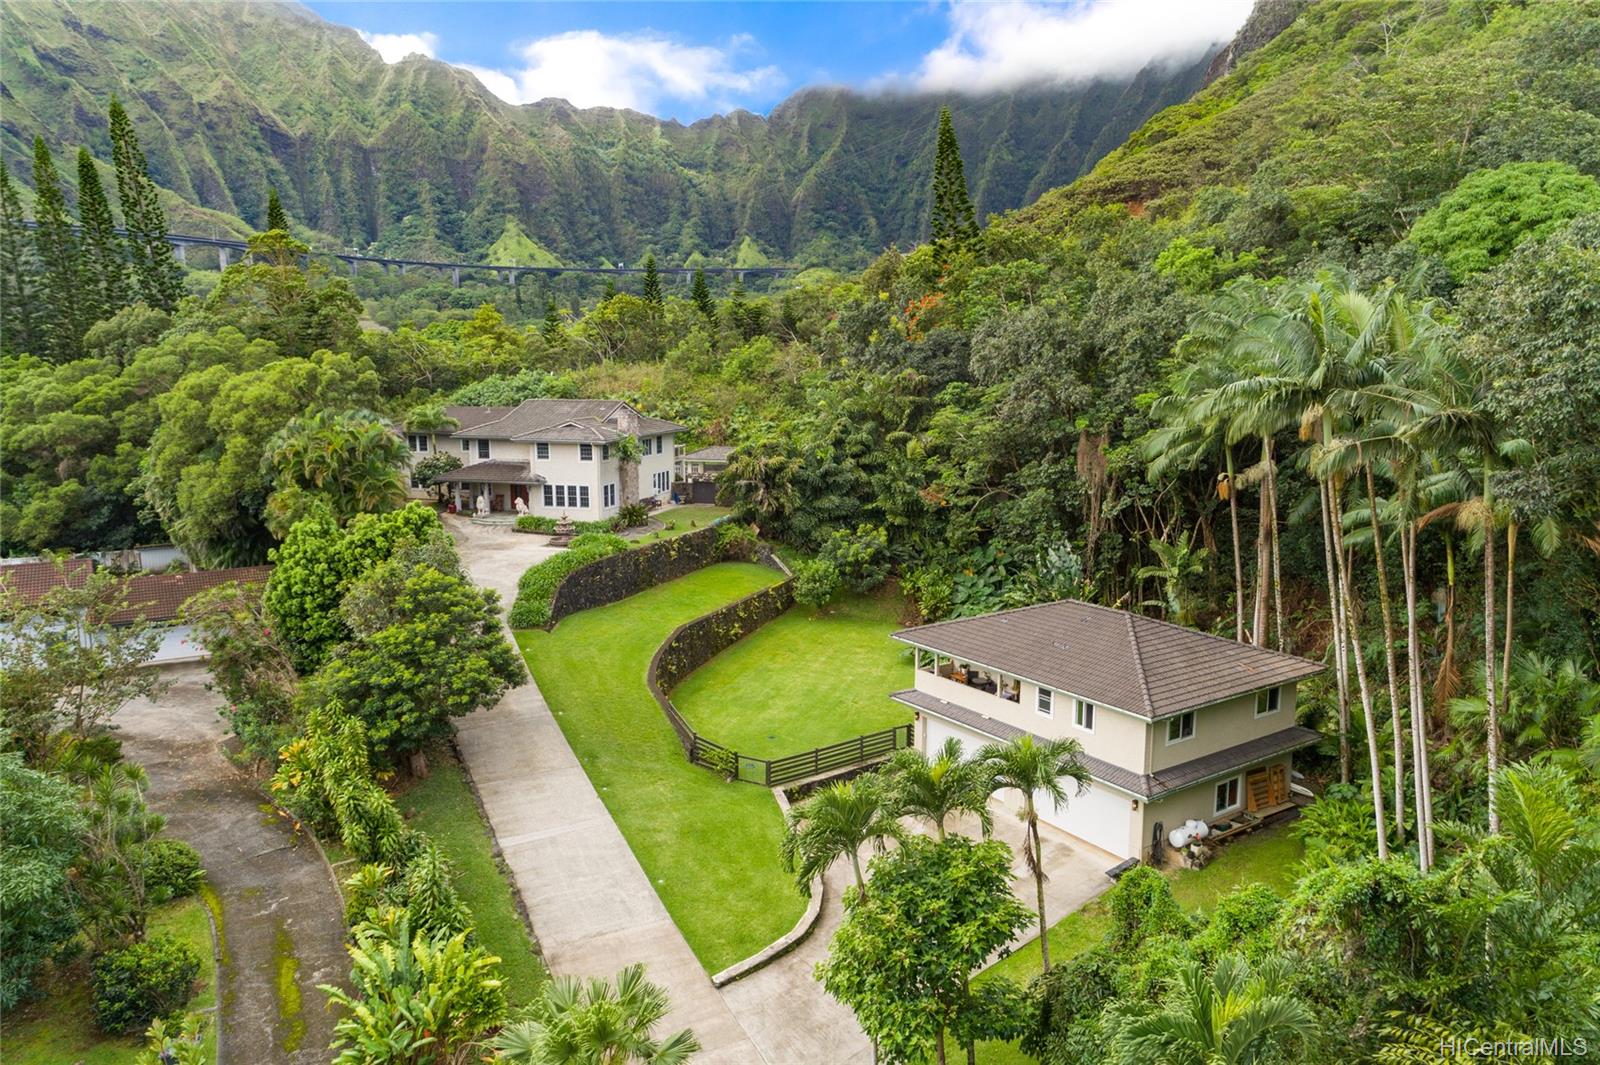 Incredible tropical retreat at the foot of the Koolau Mountains. This property features two structures on a terraced 1.7 acre lot.